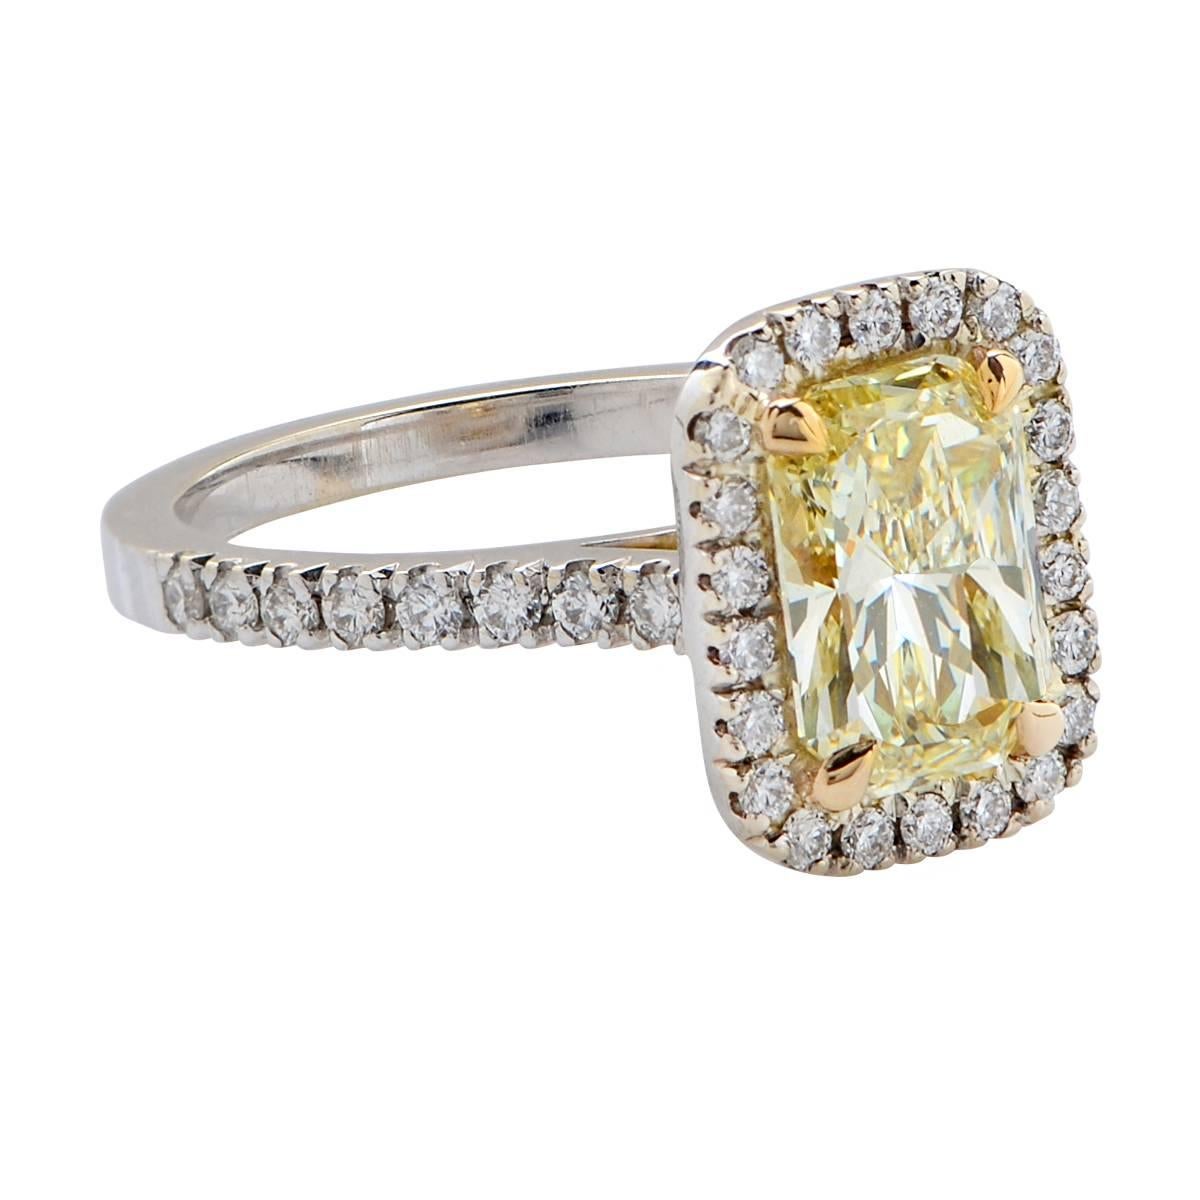 18 Karat White and Yellow Gold Custom-Made Ring Featuring a 1.71 Carat, U Color, SI1 Clarity, Radiant Cut Diamond Accented by 38 Round Brilliant Cut Diamonds Weighing .41 Carats Total, G Color, VS Clarity.